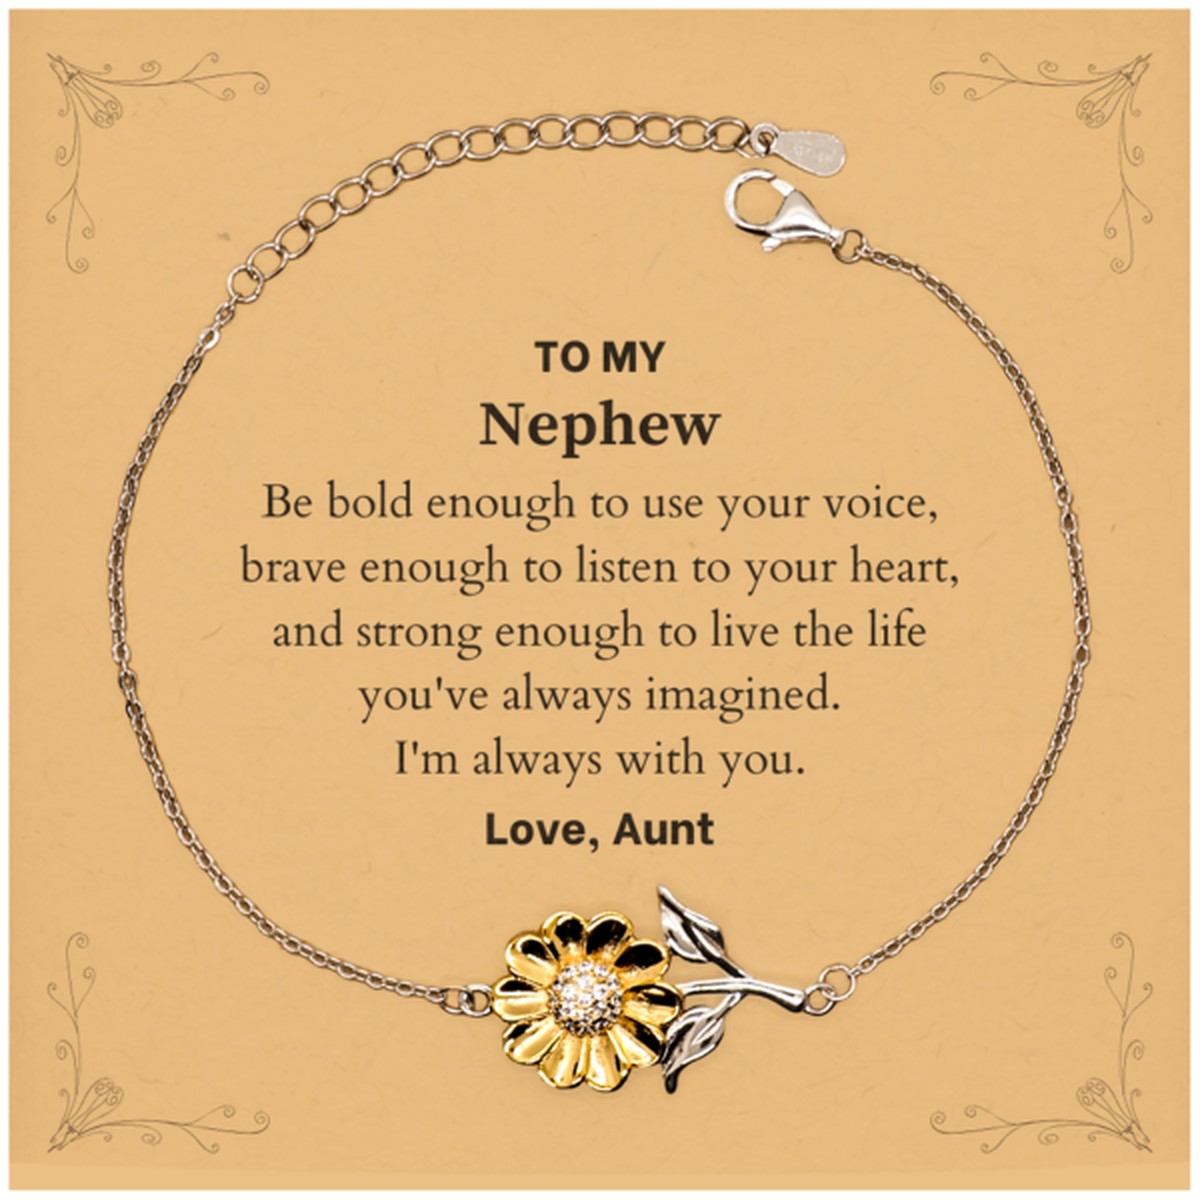 Keepsake Nephew Sunflower Bracelet Gift Idea Graduation Christmas Birthday Nephew from Aunt, Nephew Be bold enough to use your voice, brave enough to listen to your heart. Love, Aunt